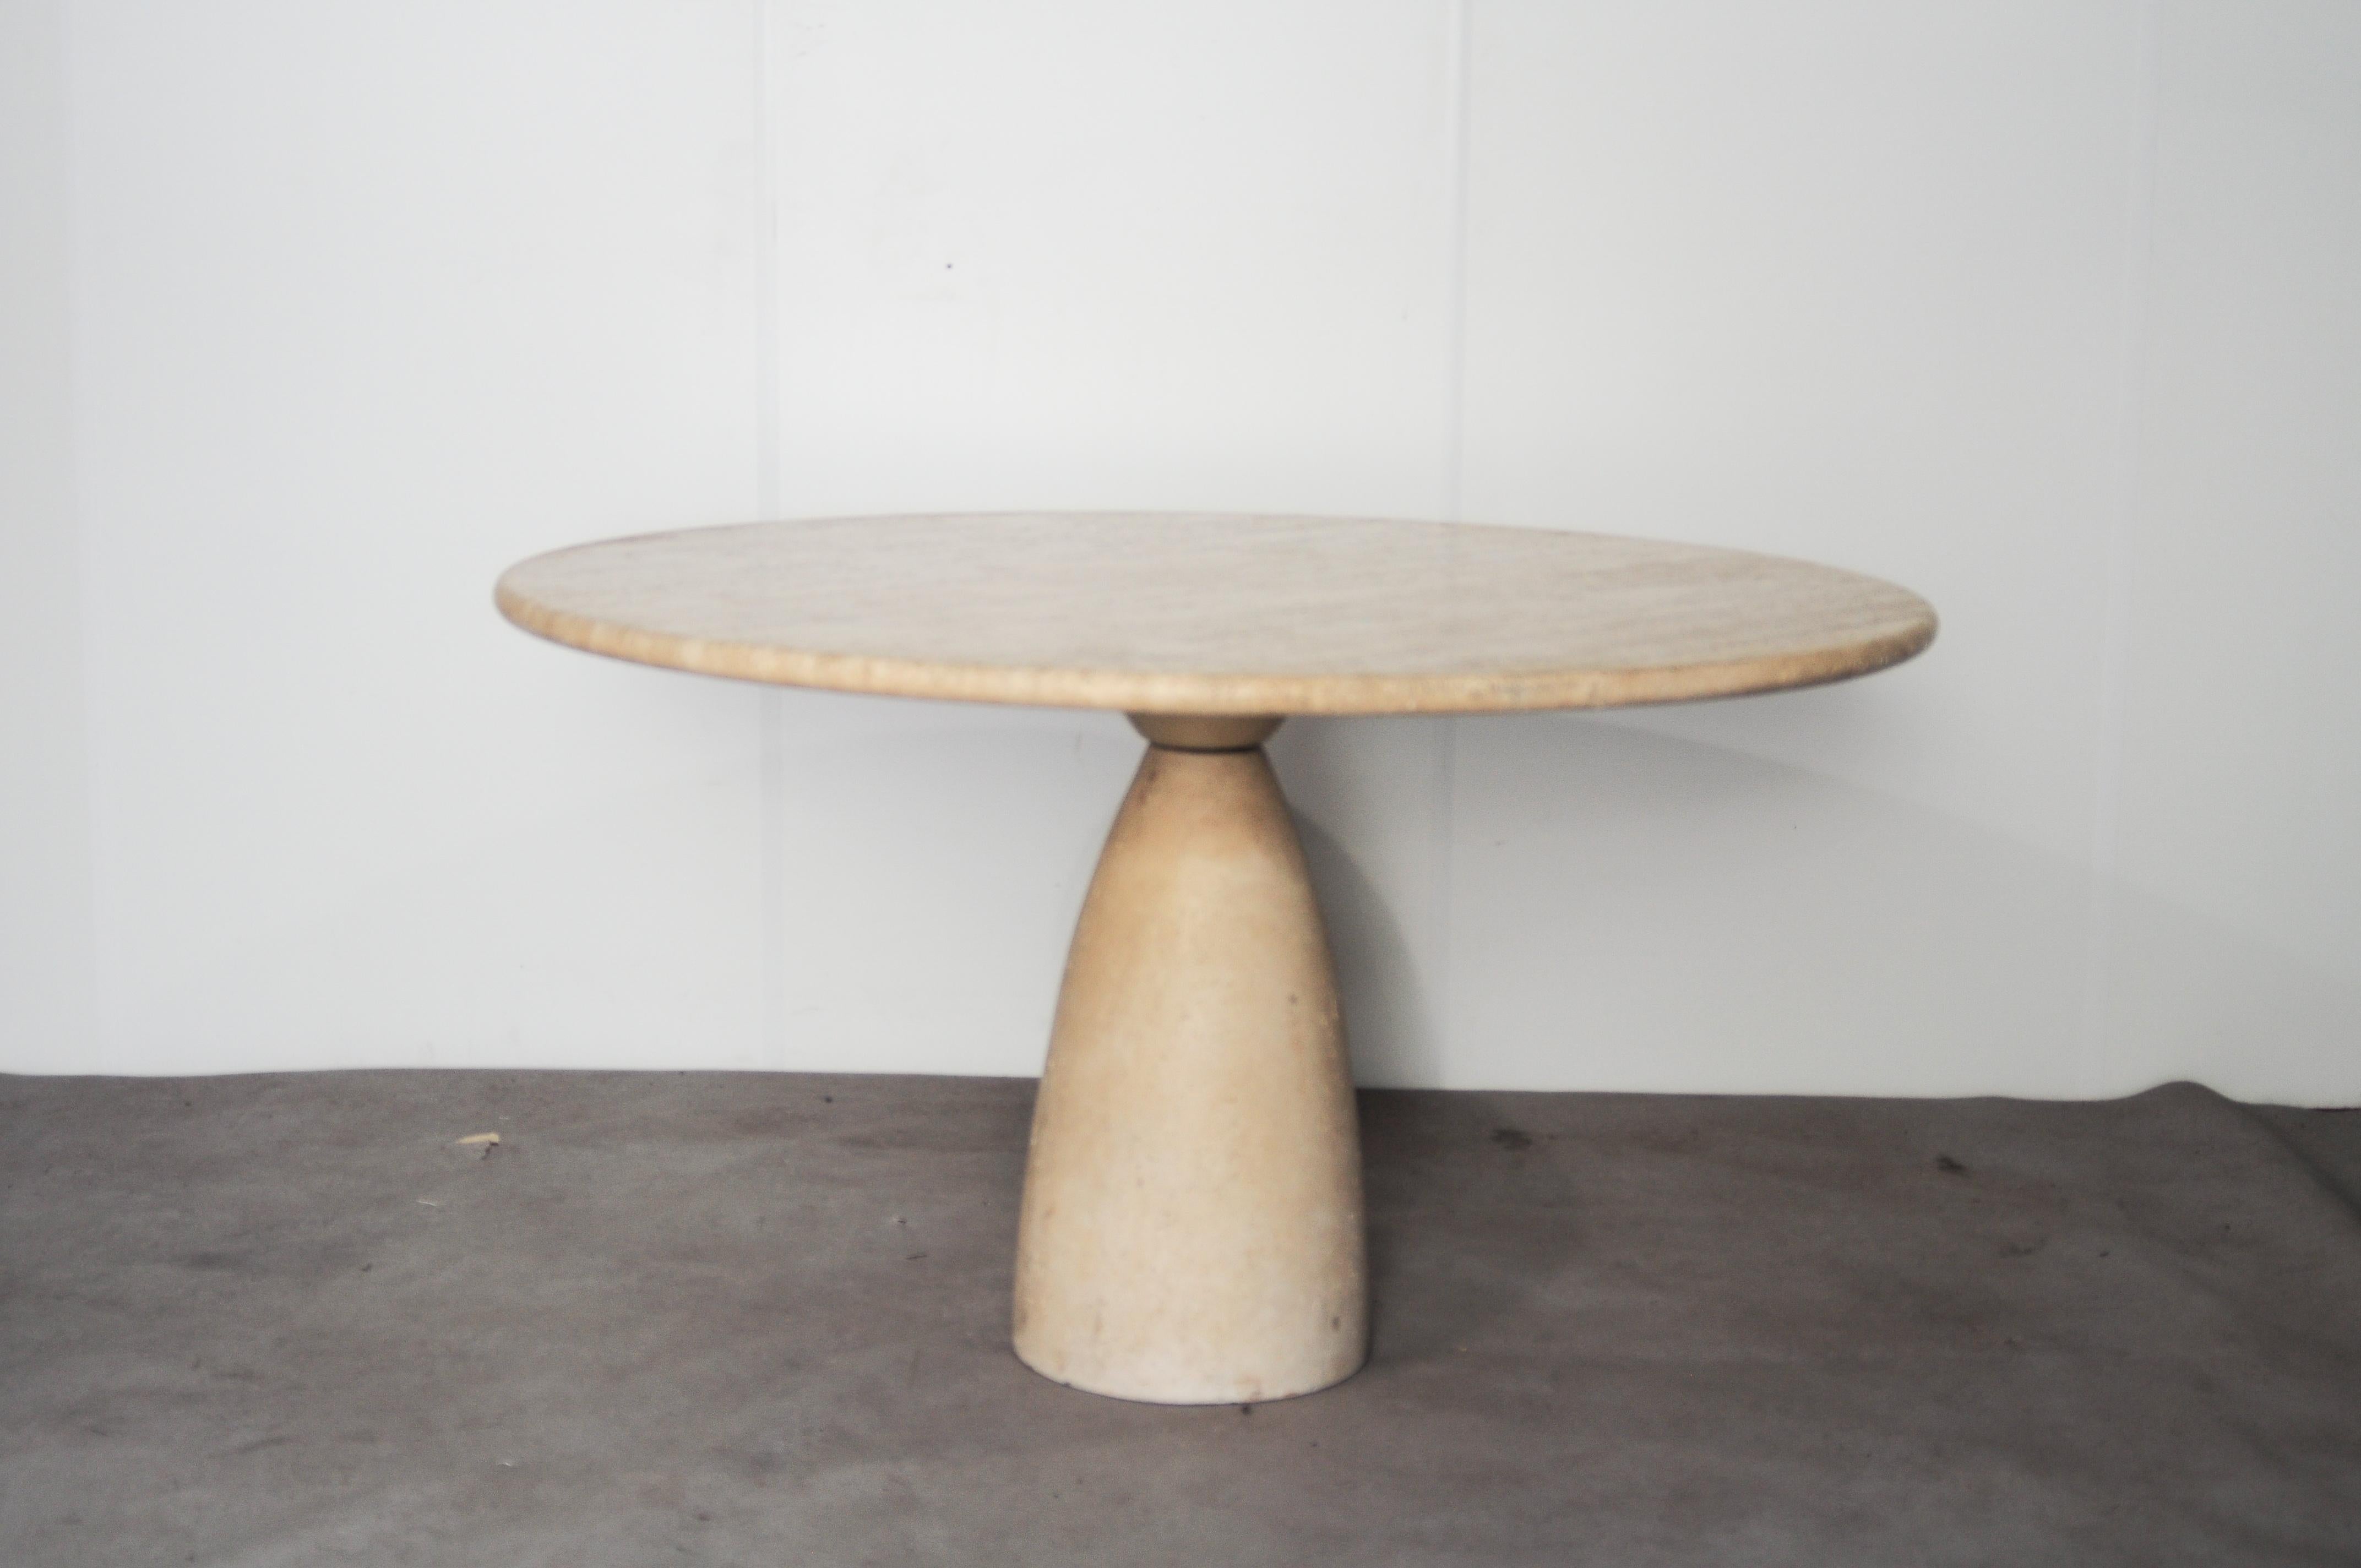 Peter Draenert “Finale 1790” round solid travertine dining table for Draenert, Germany, 1970s.

A rare and very heavy solid travertine dining table by Peter Draenert, marked under the top.

In good condition. A small chip missing from the side